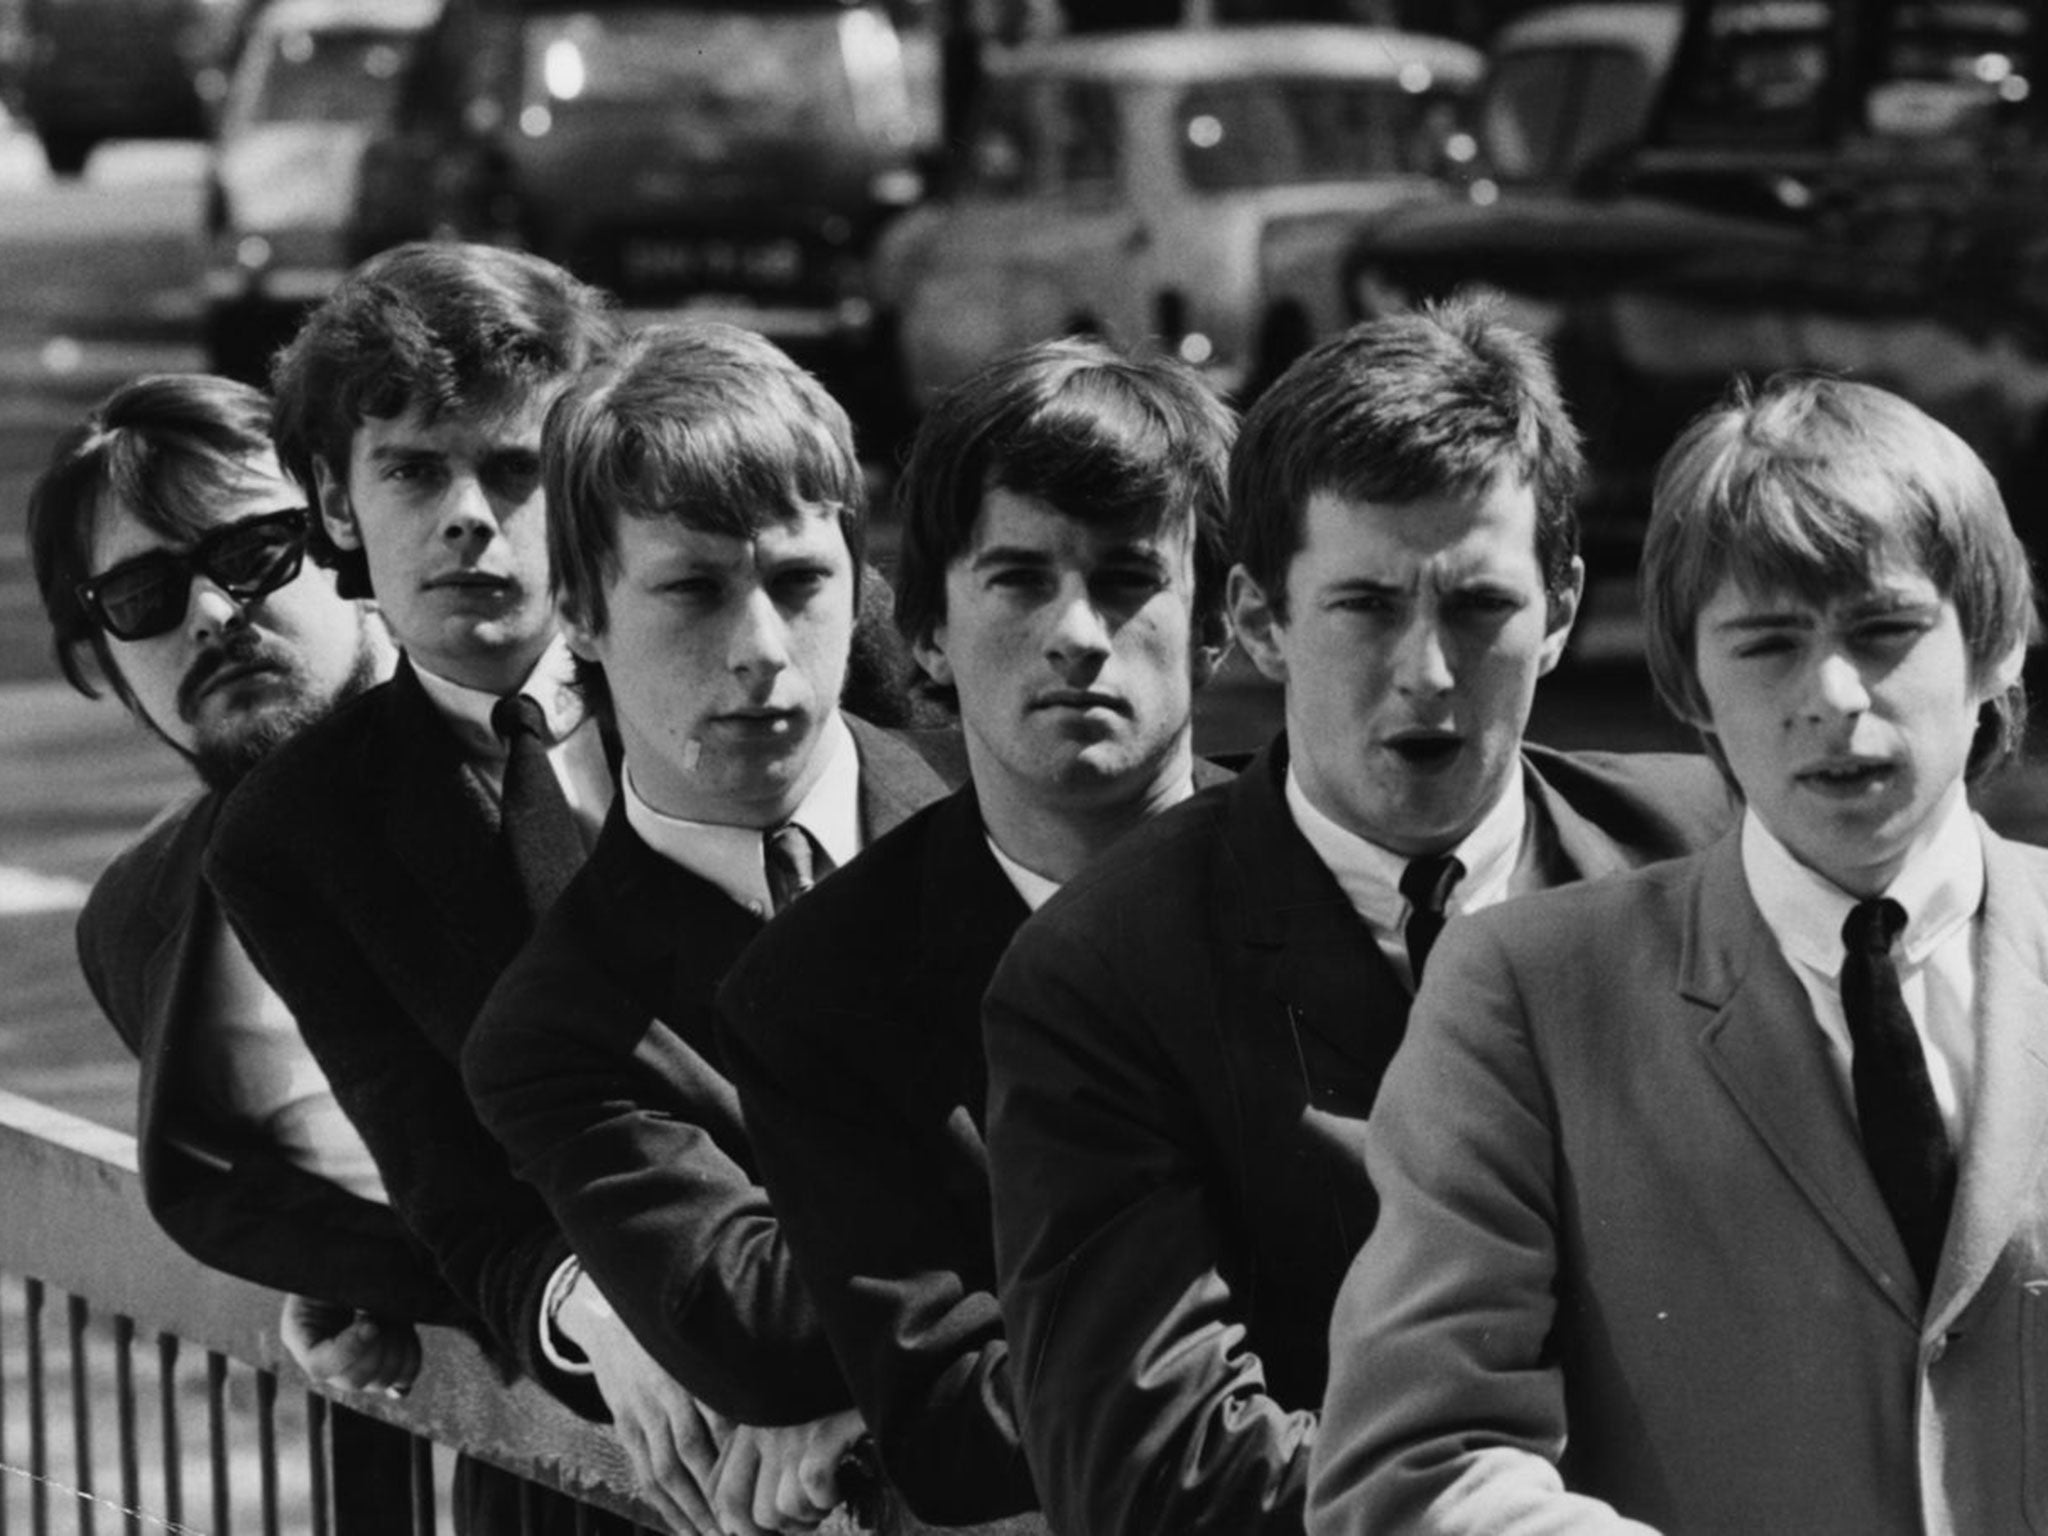 Gomelsky, far left, with the Yardbirds, left to right, Paul Samwell-Smith, Chris Dreja, Jim McCarty, Eric Clapton and Keith Relf